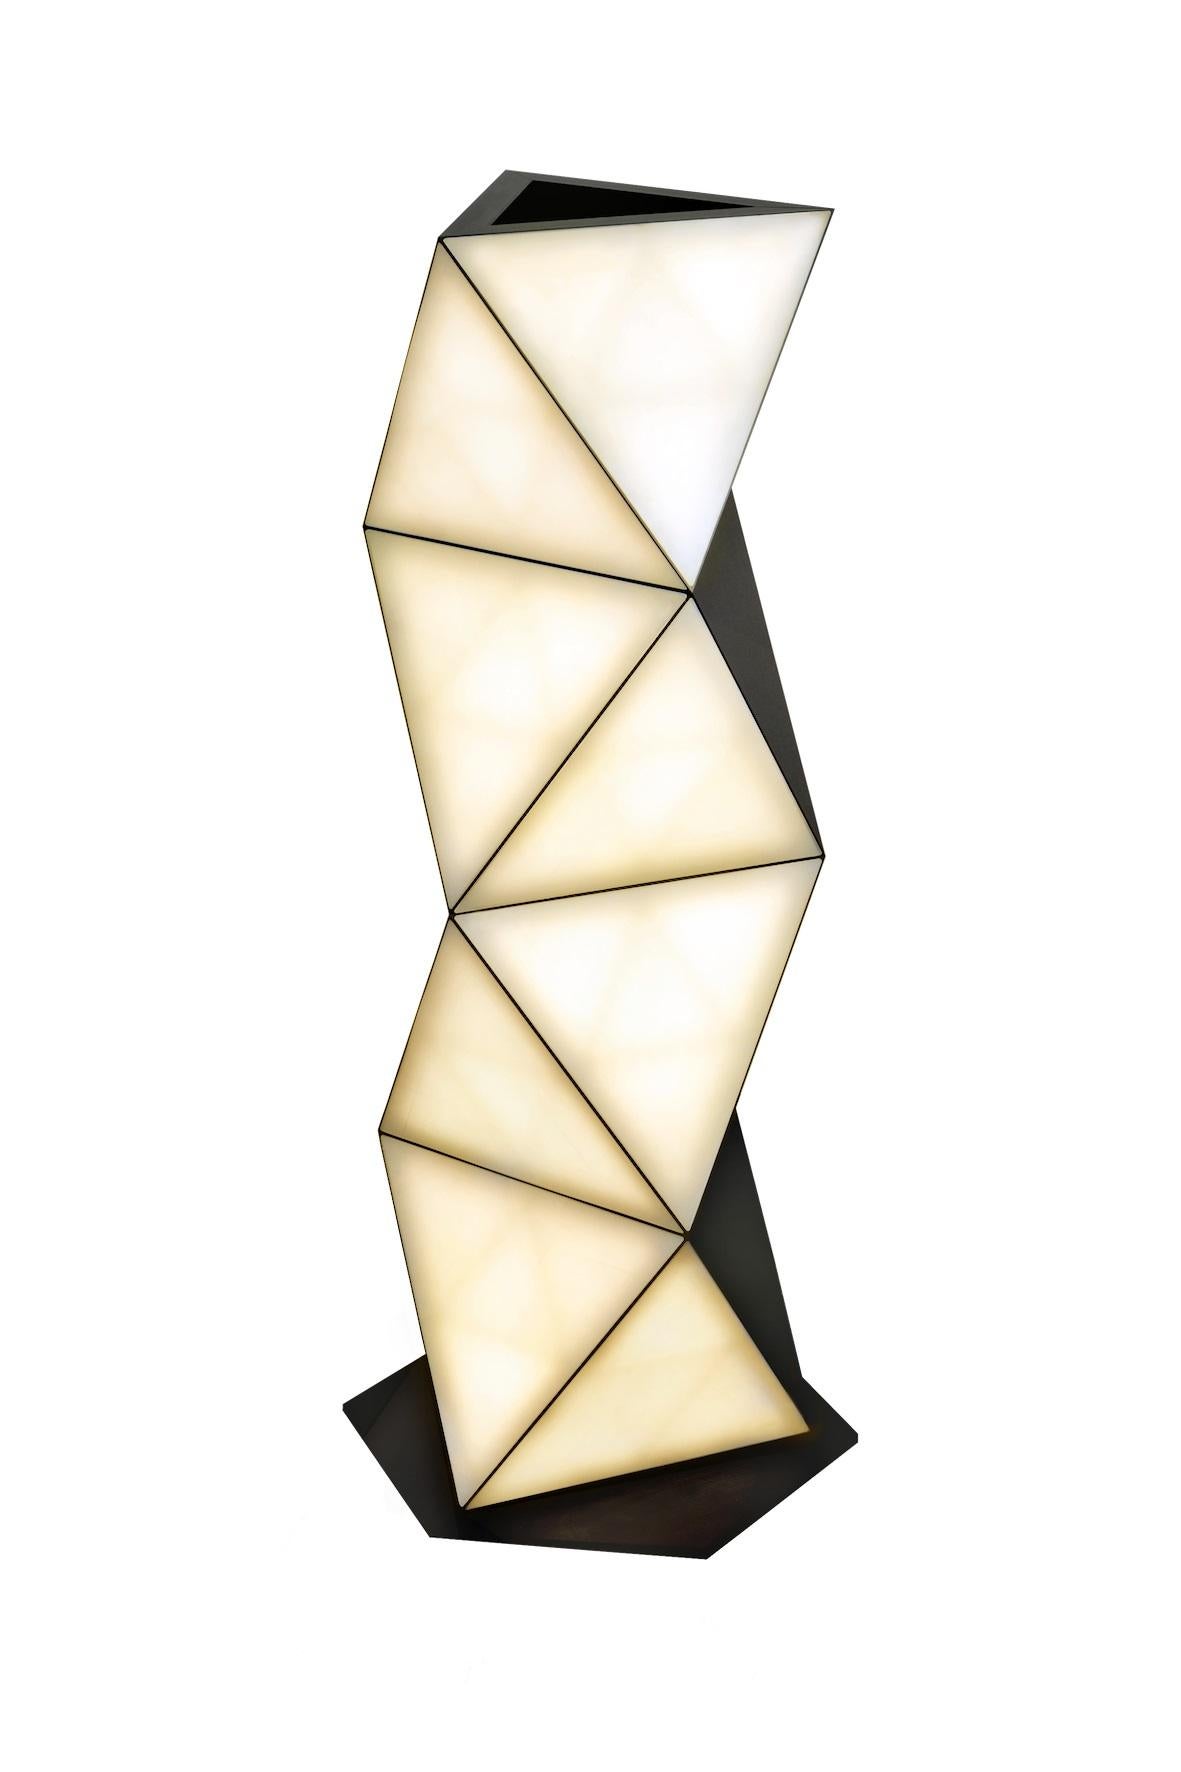 Totem floor lamp L by Tokio
Dimensions: D 55 x W 48 x H 130 cm.
Materials: Anodized aluminium.

A new addition to our colection, Totem. To play, to toy, to imagine, to enjoy, to illuminate. Having clear mind, having clear-cut clean geometry – we